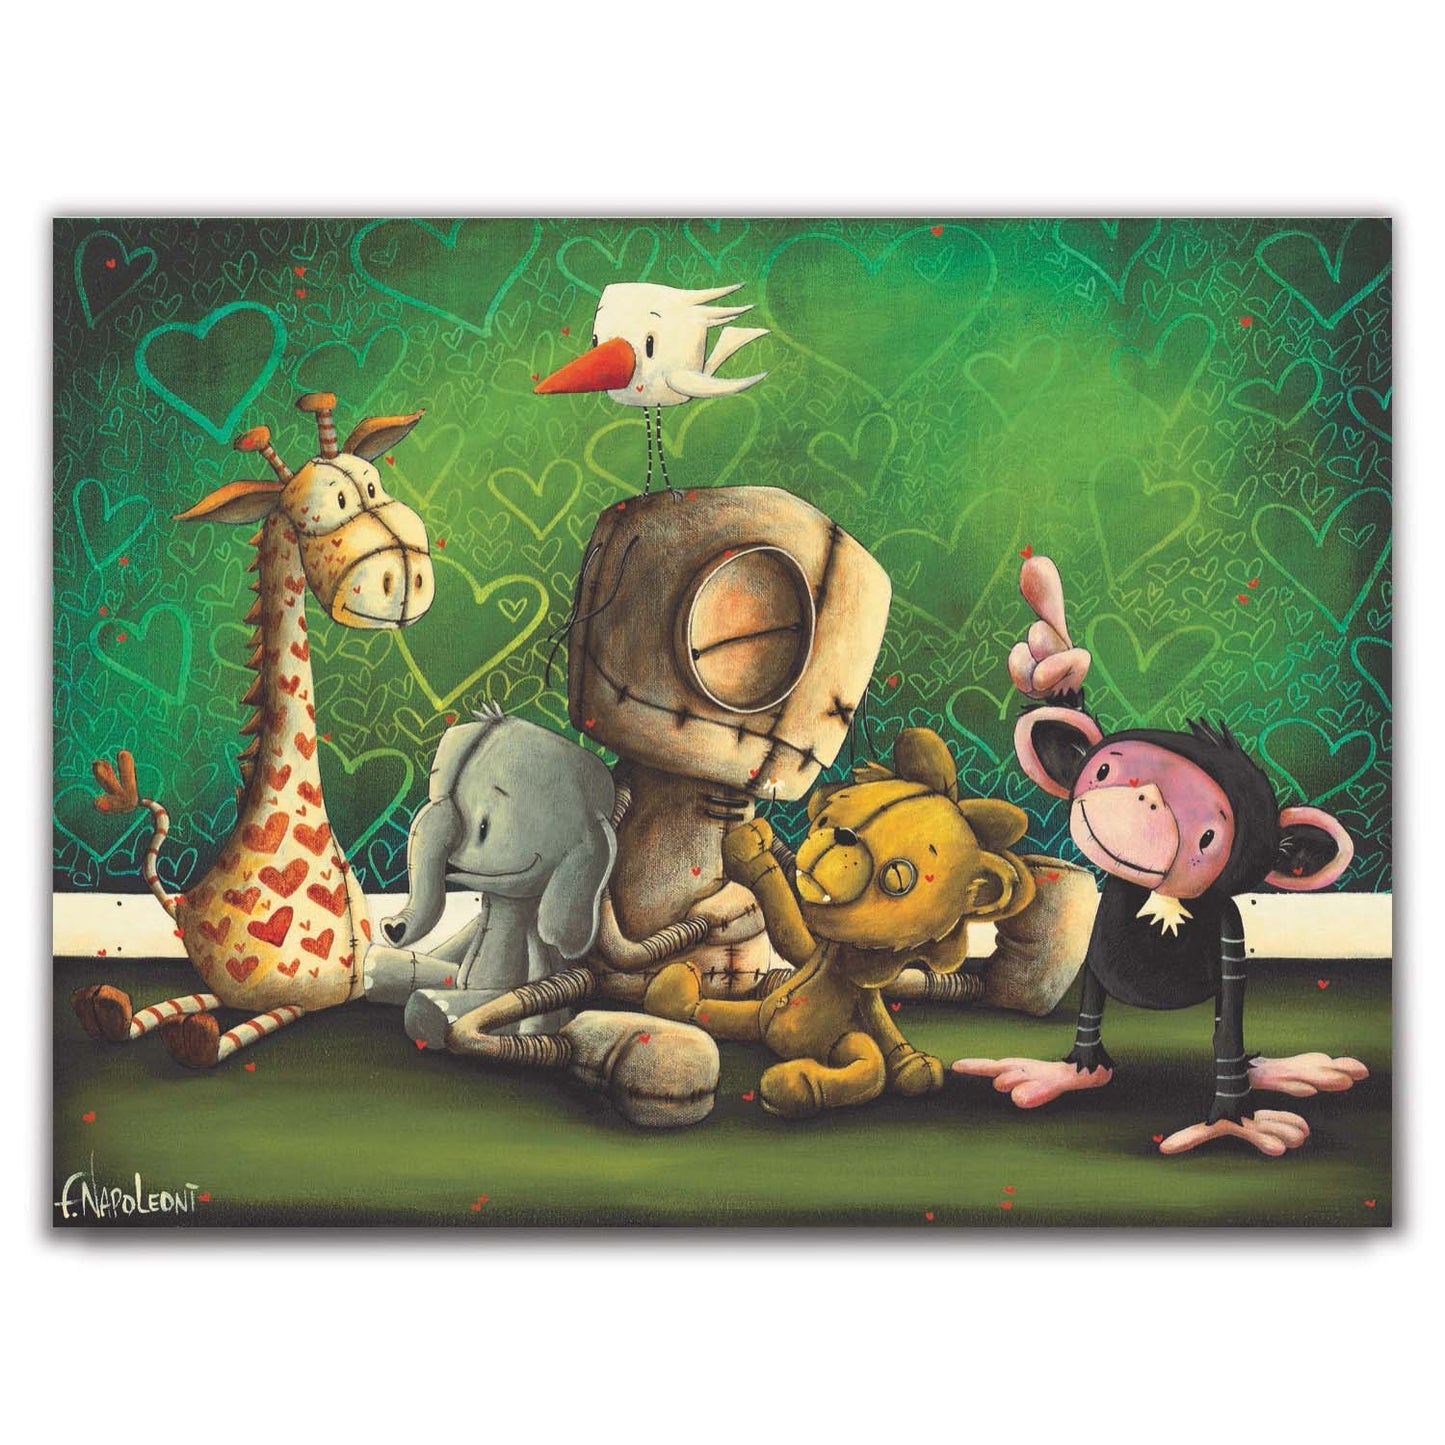 Fabio Napoleoni "Best Friends Forever" Limited Edition Canvas Giclee